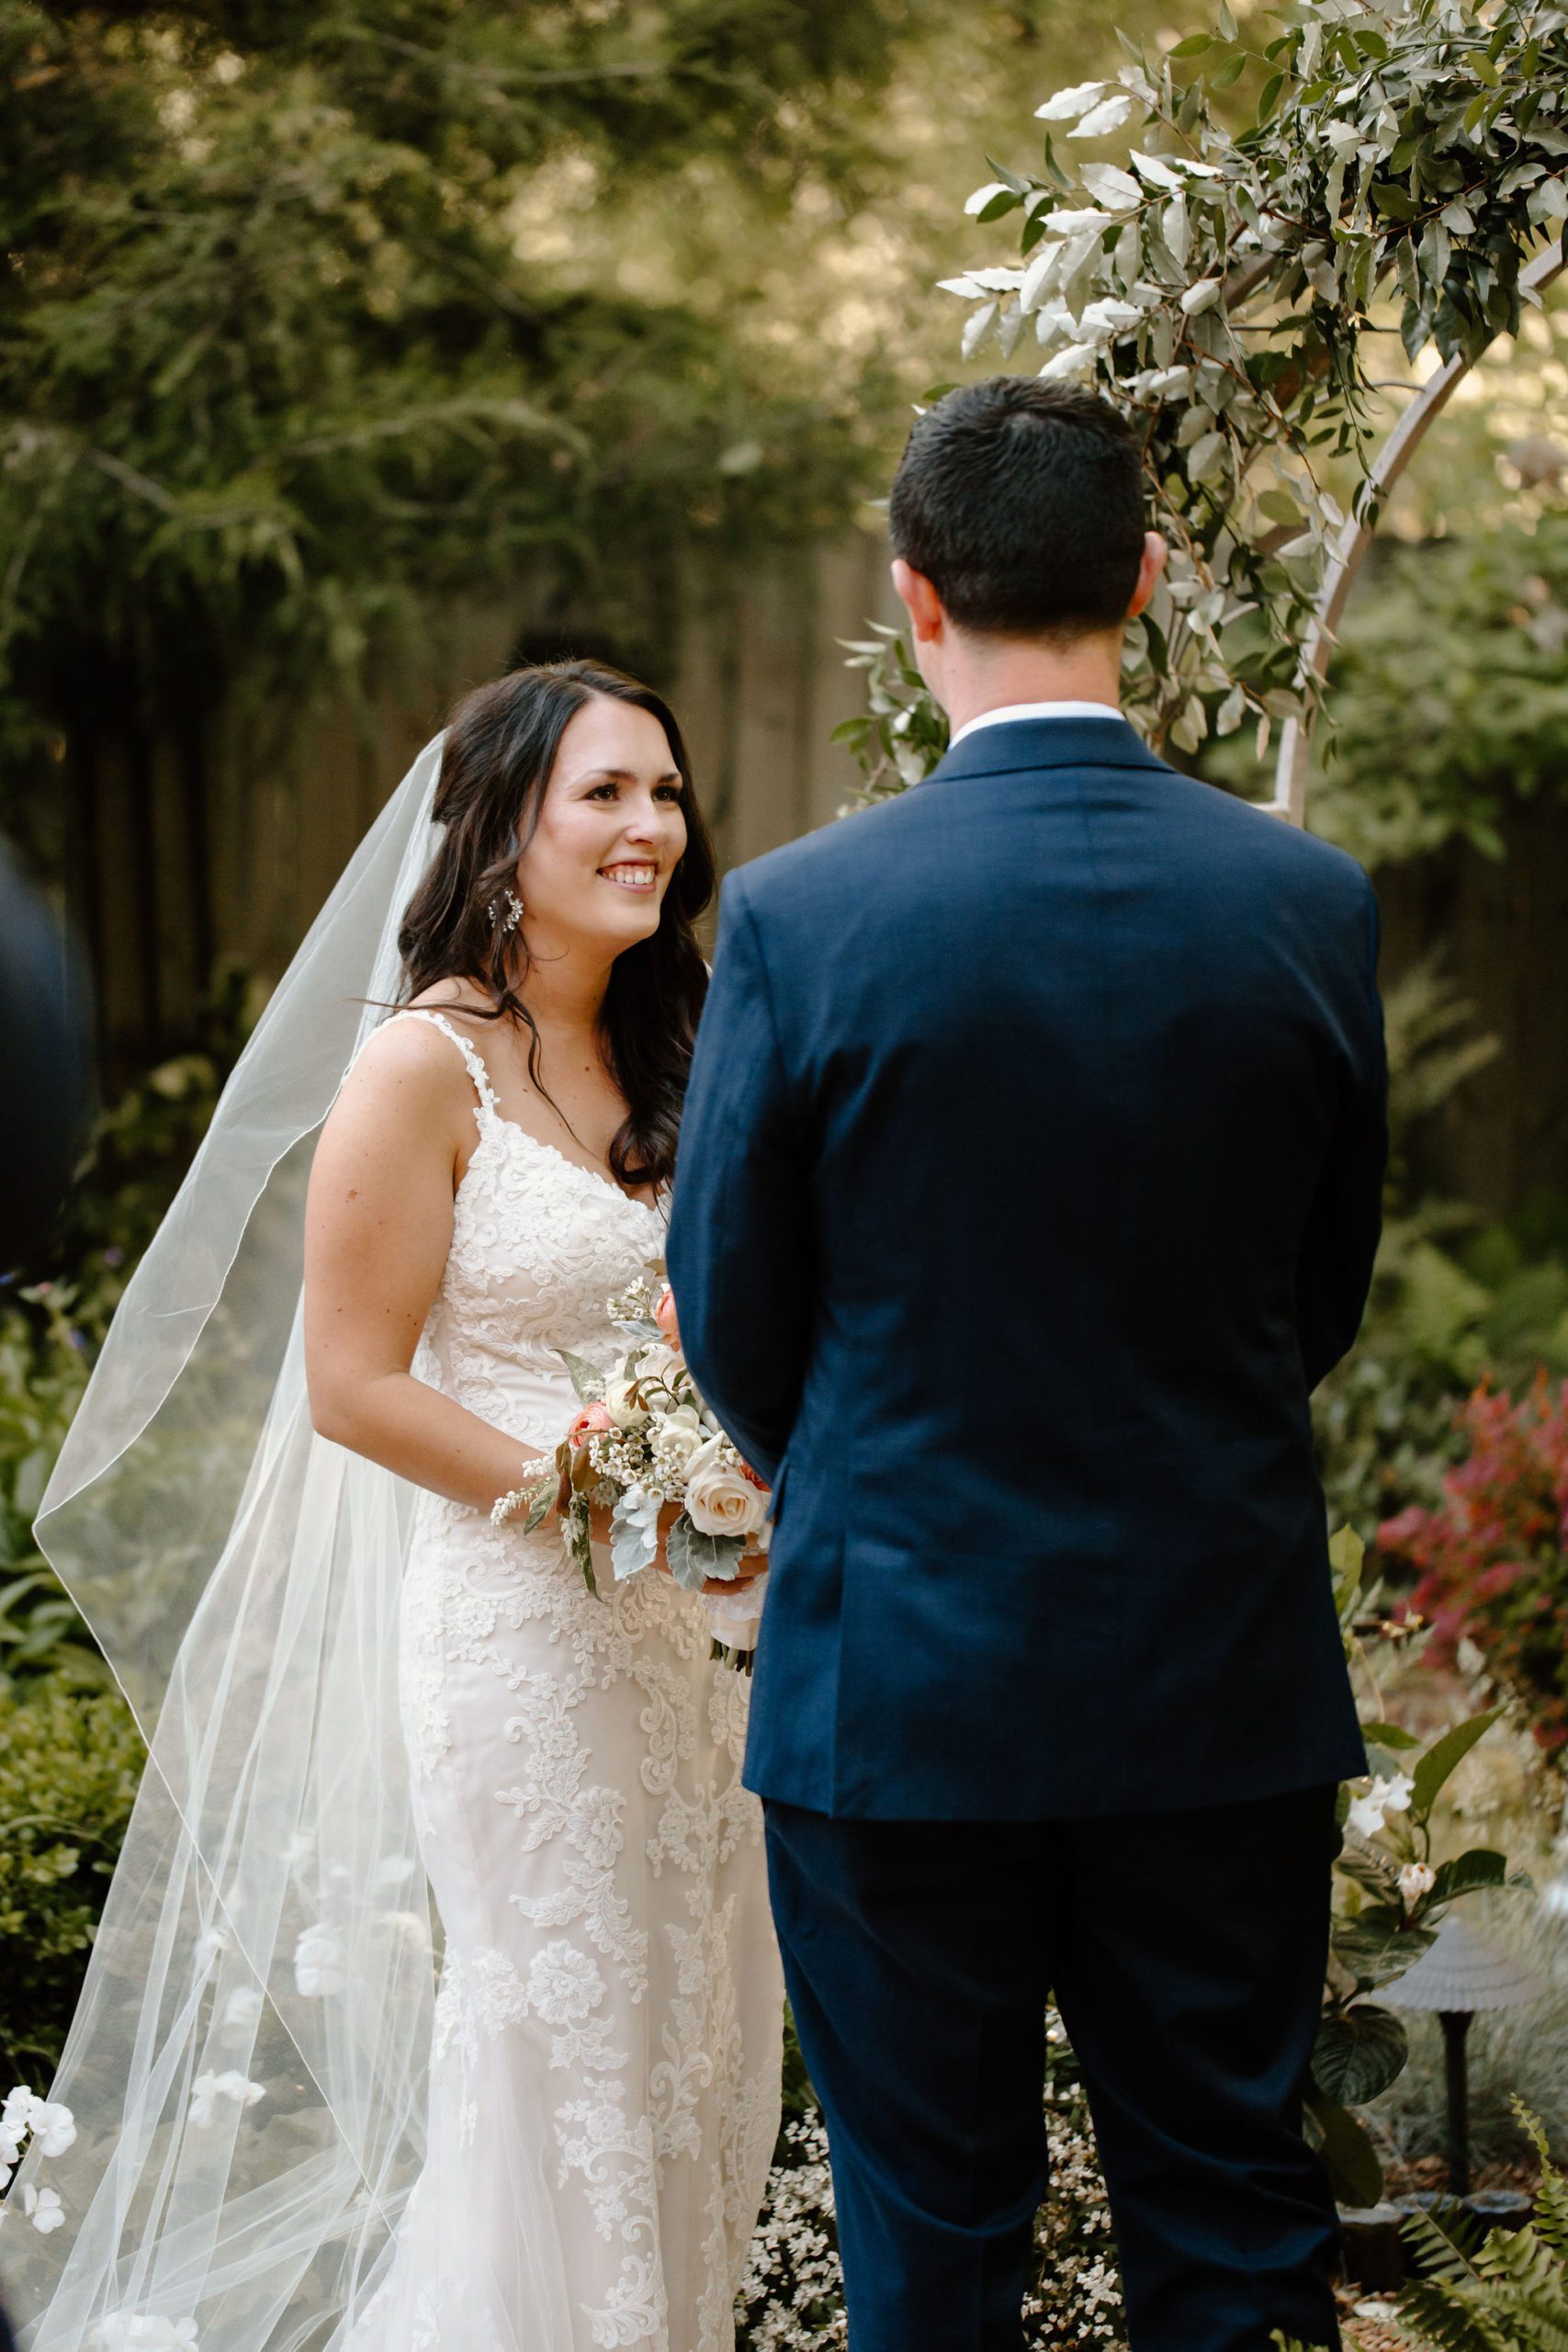 Beautiful bride and groom photos with light and airy floral arrangements and simple elegant decor 